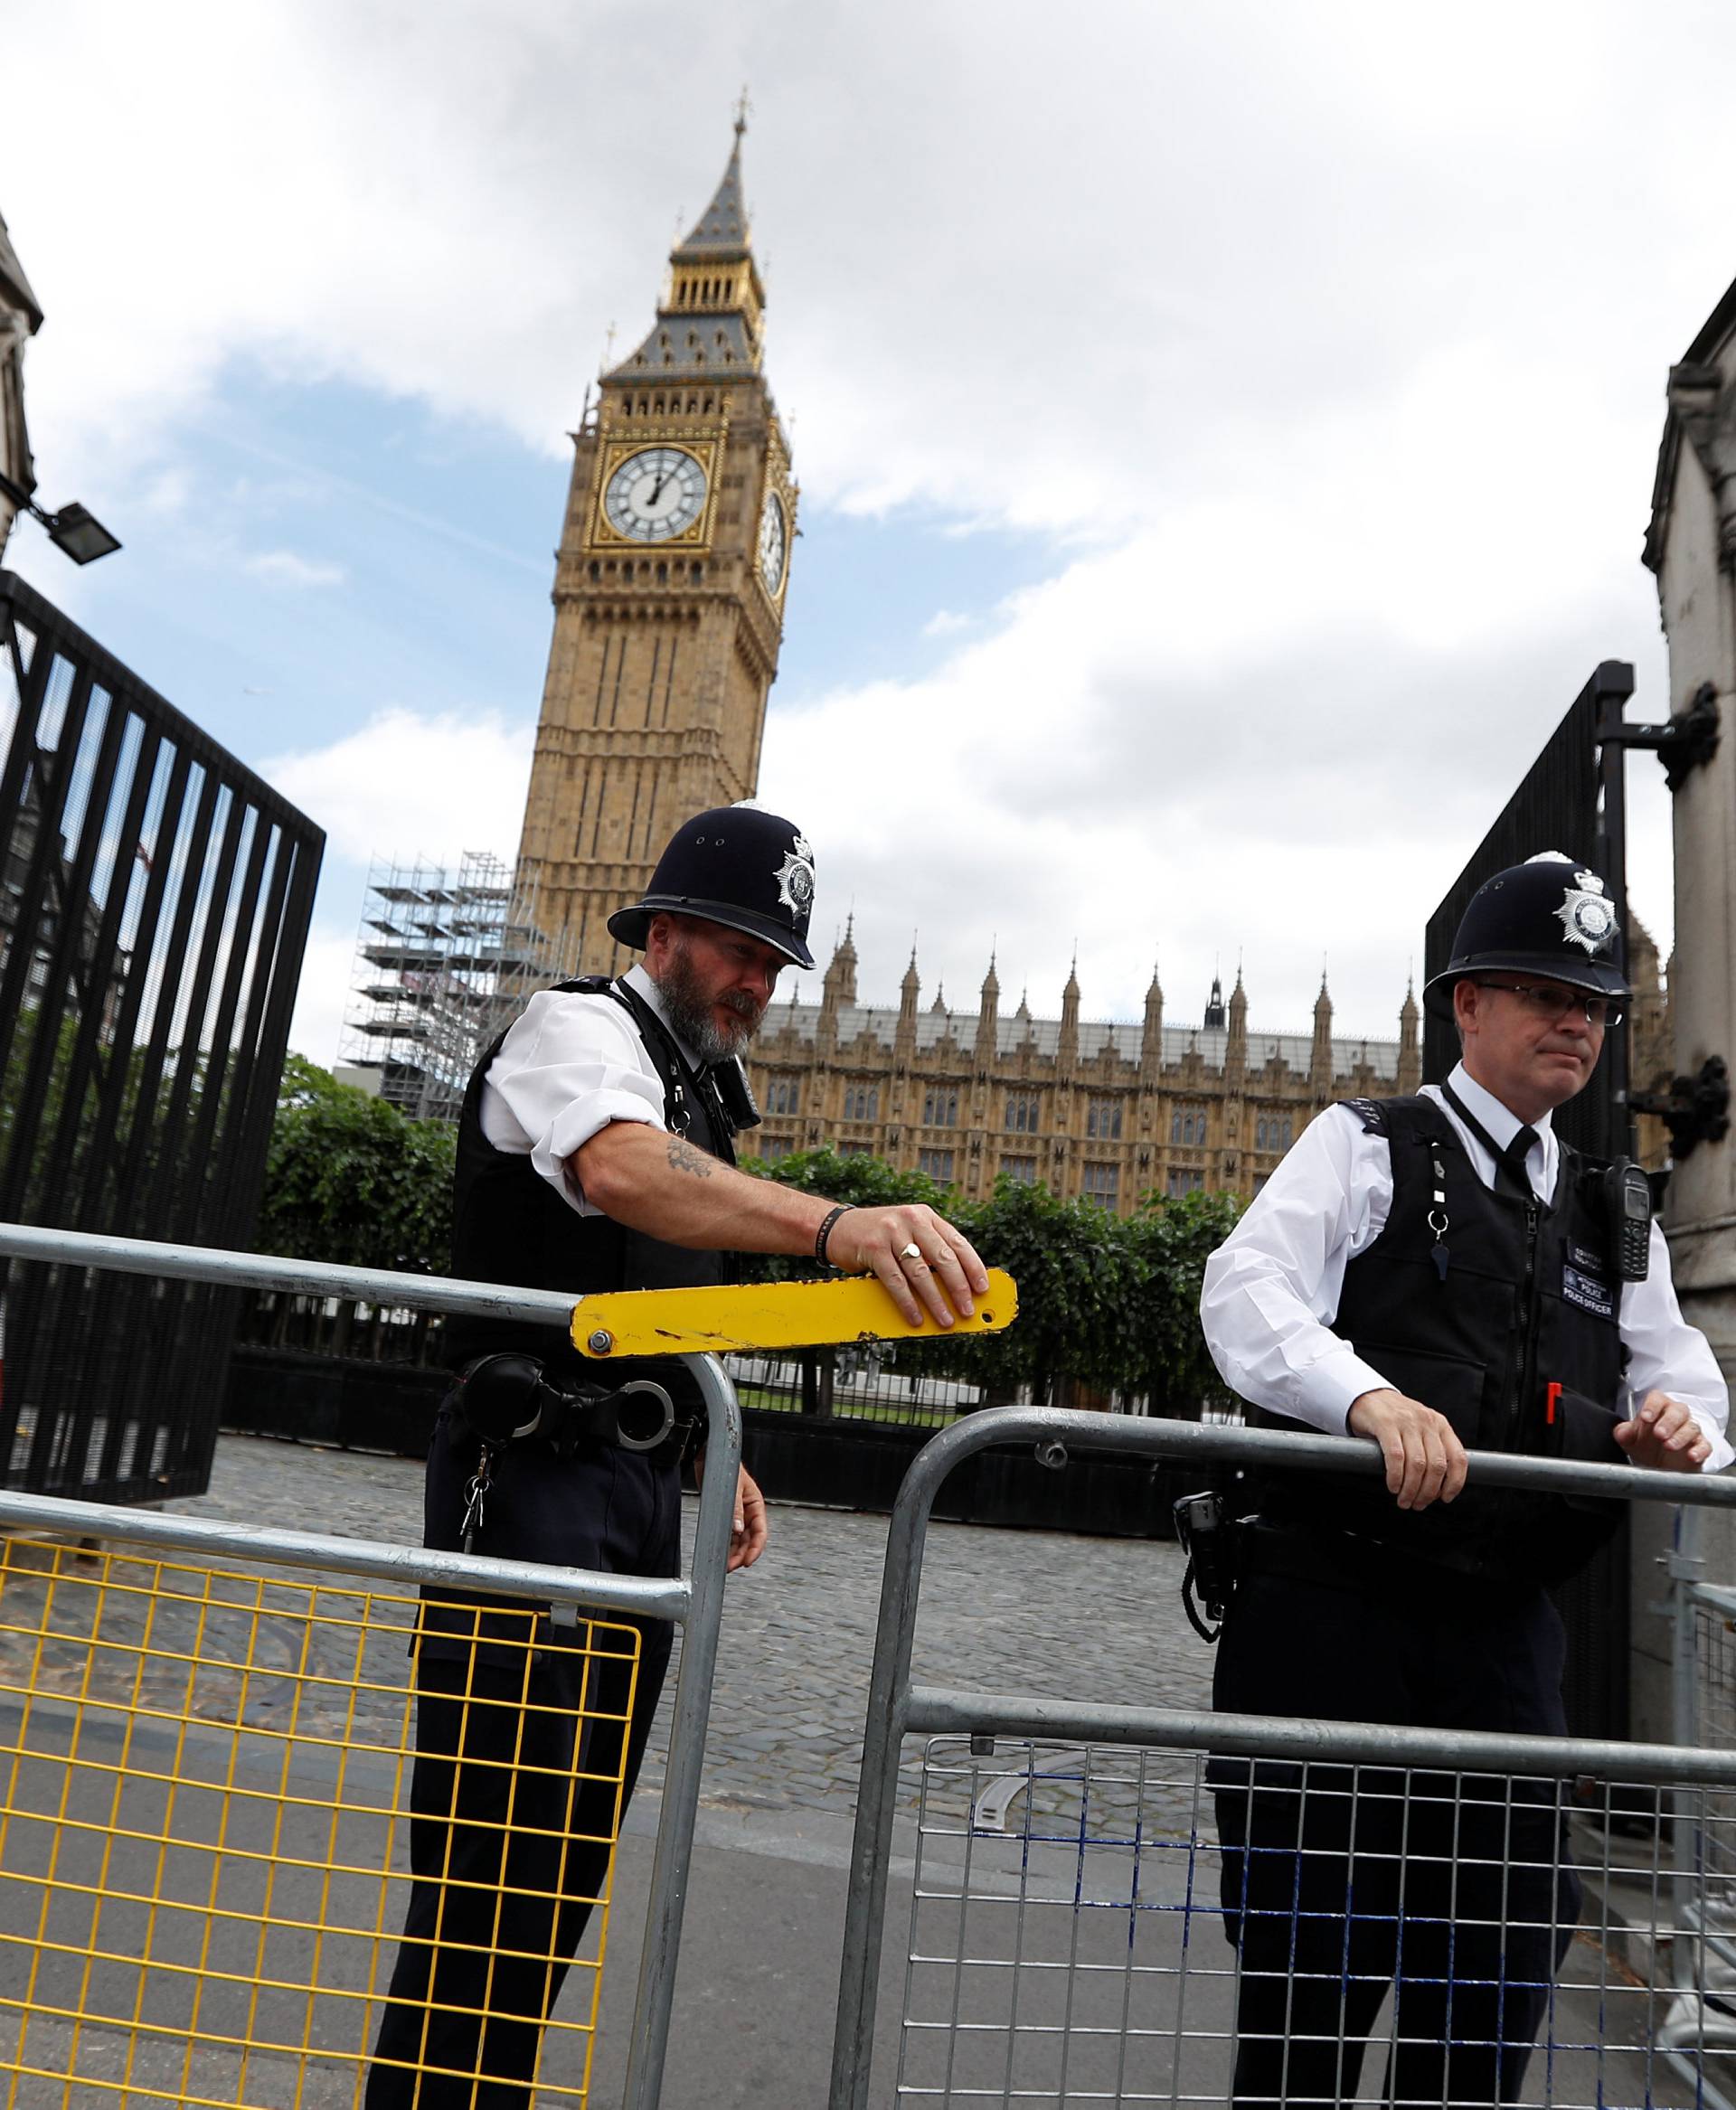 Armed police officers secure the Carriage Gate entrance as they stand outside the Palace of Westminster, in central London